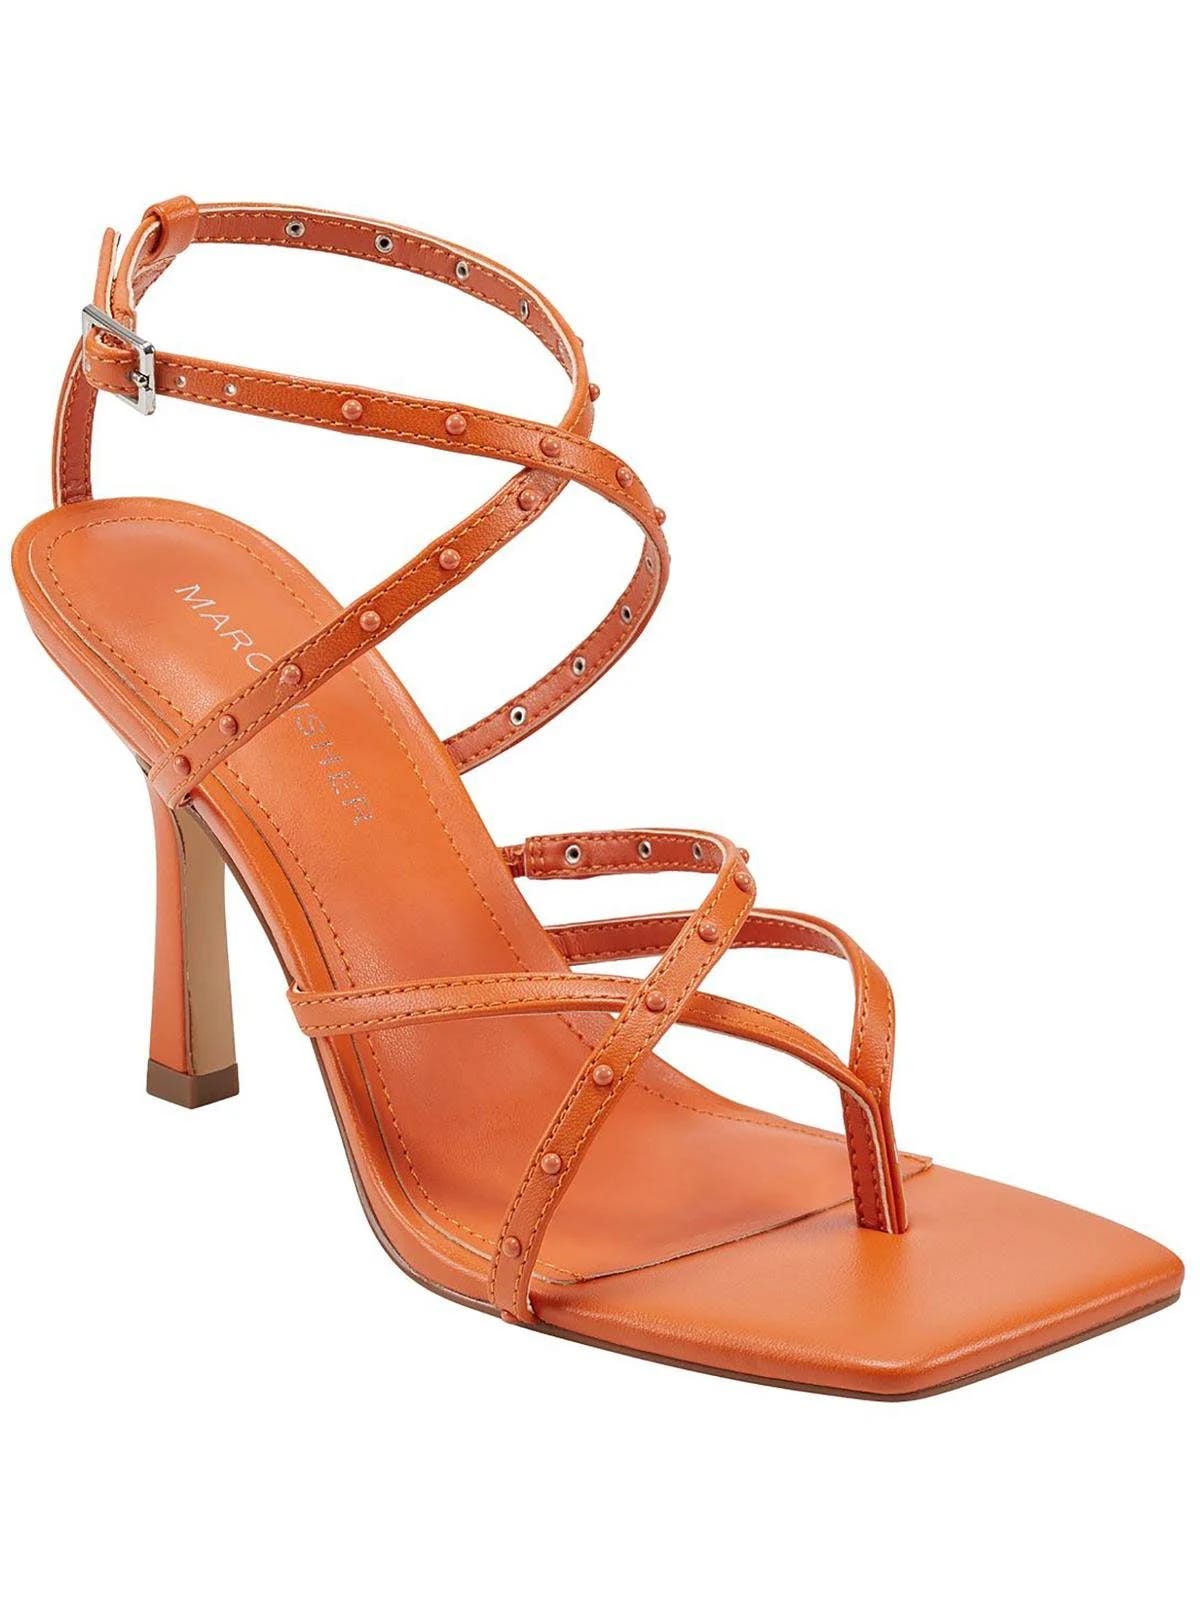 Orange Strappy Heels by Marc Fisher Bossi | Image